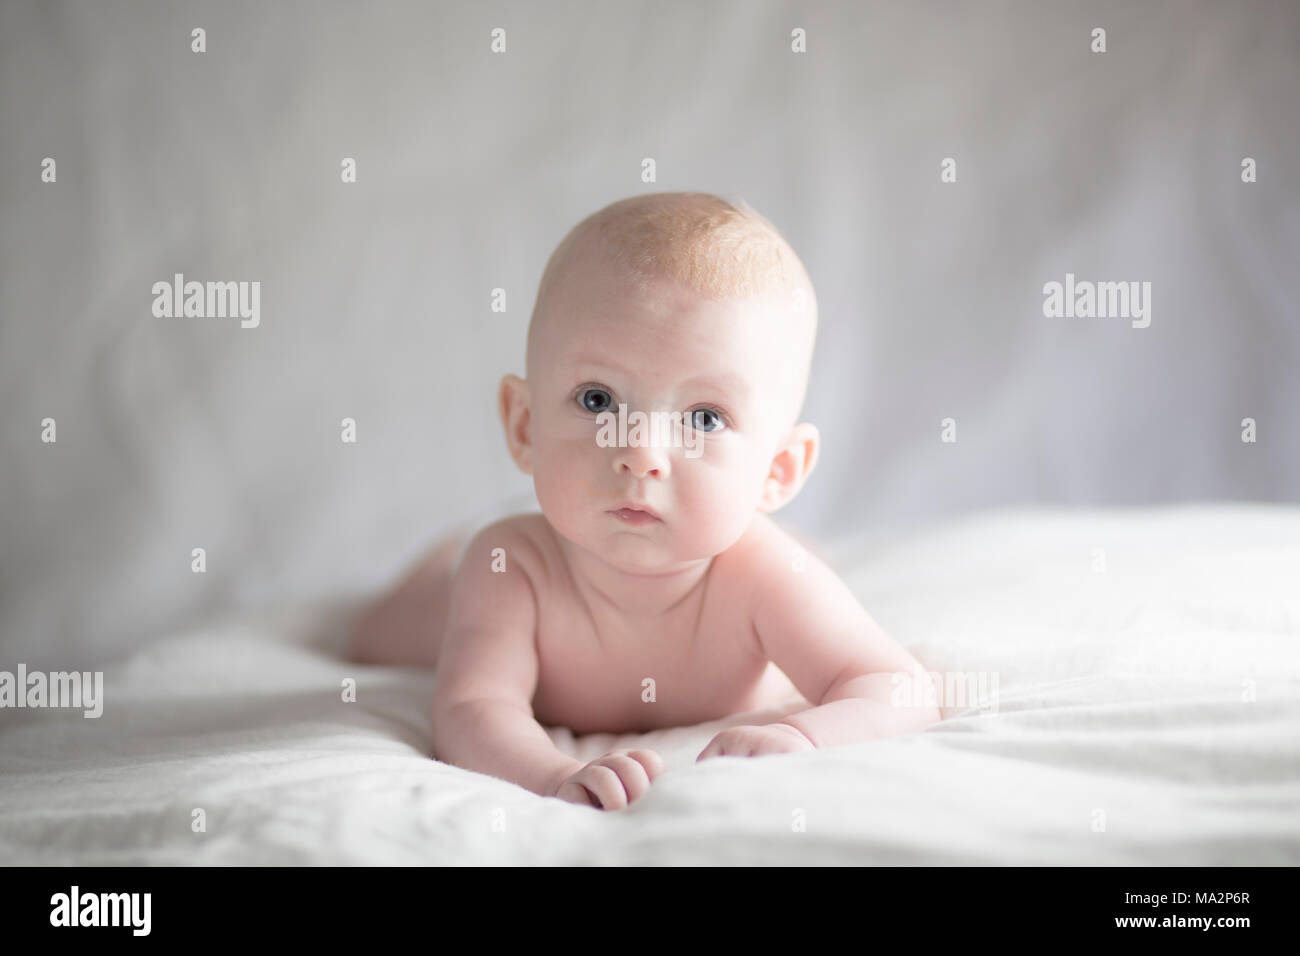 cute baby boy lying on bed with a contemplative look on his face Stock Photo